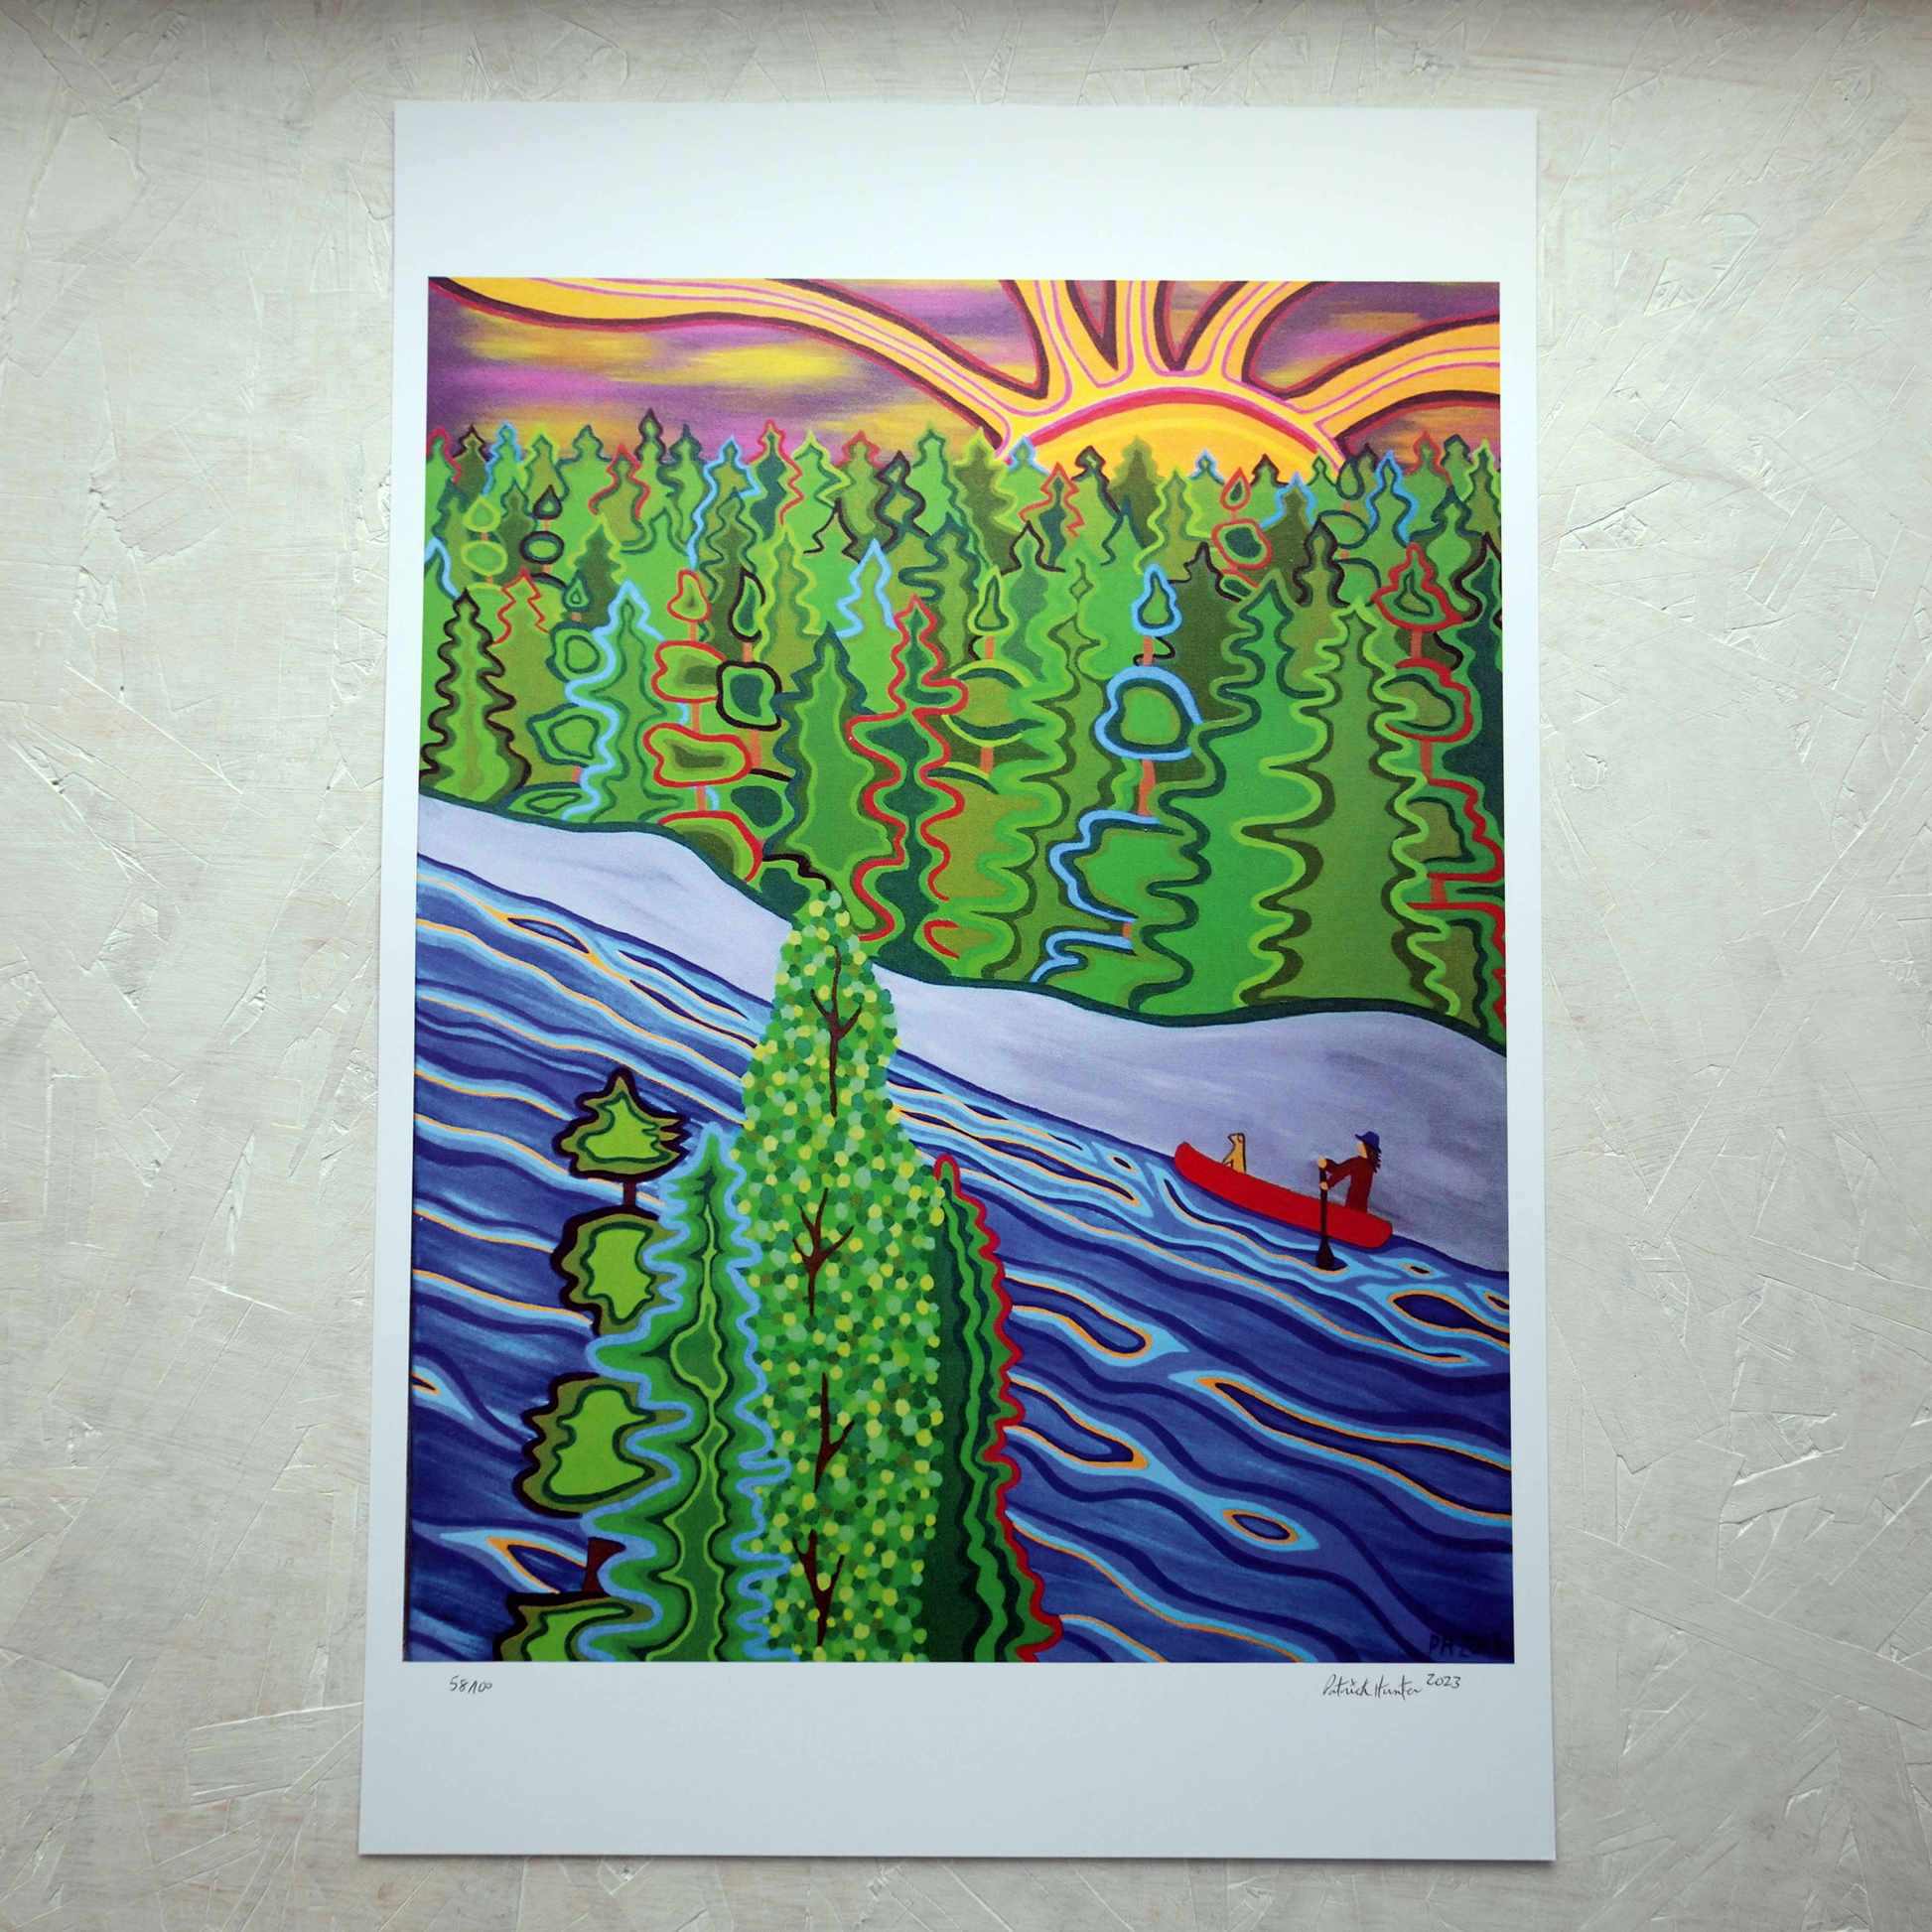 Print of Patrick Hunter's painting of a paddler with canine friend in a canoe on water with trees and sun, woodland art style.